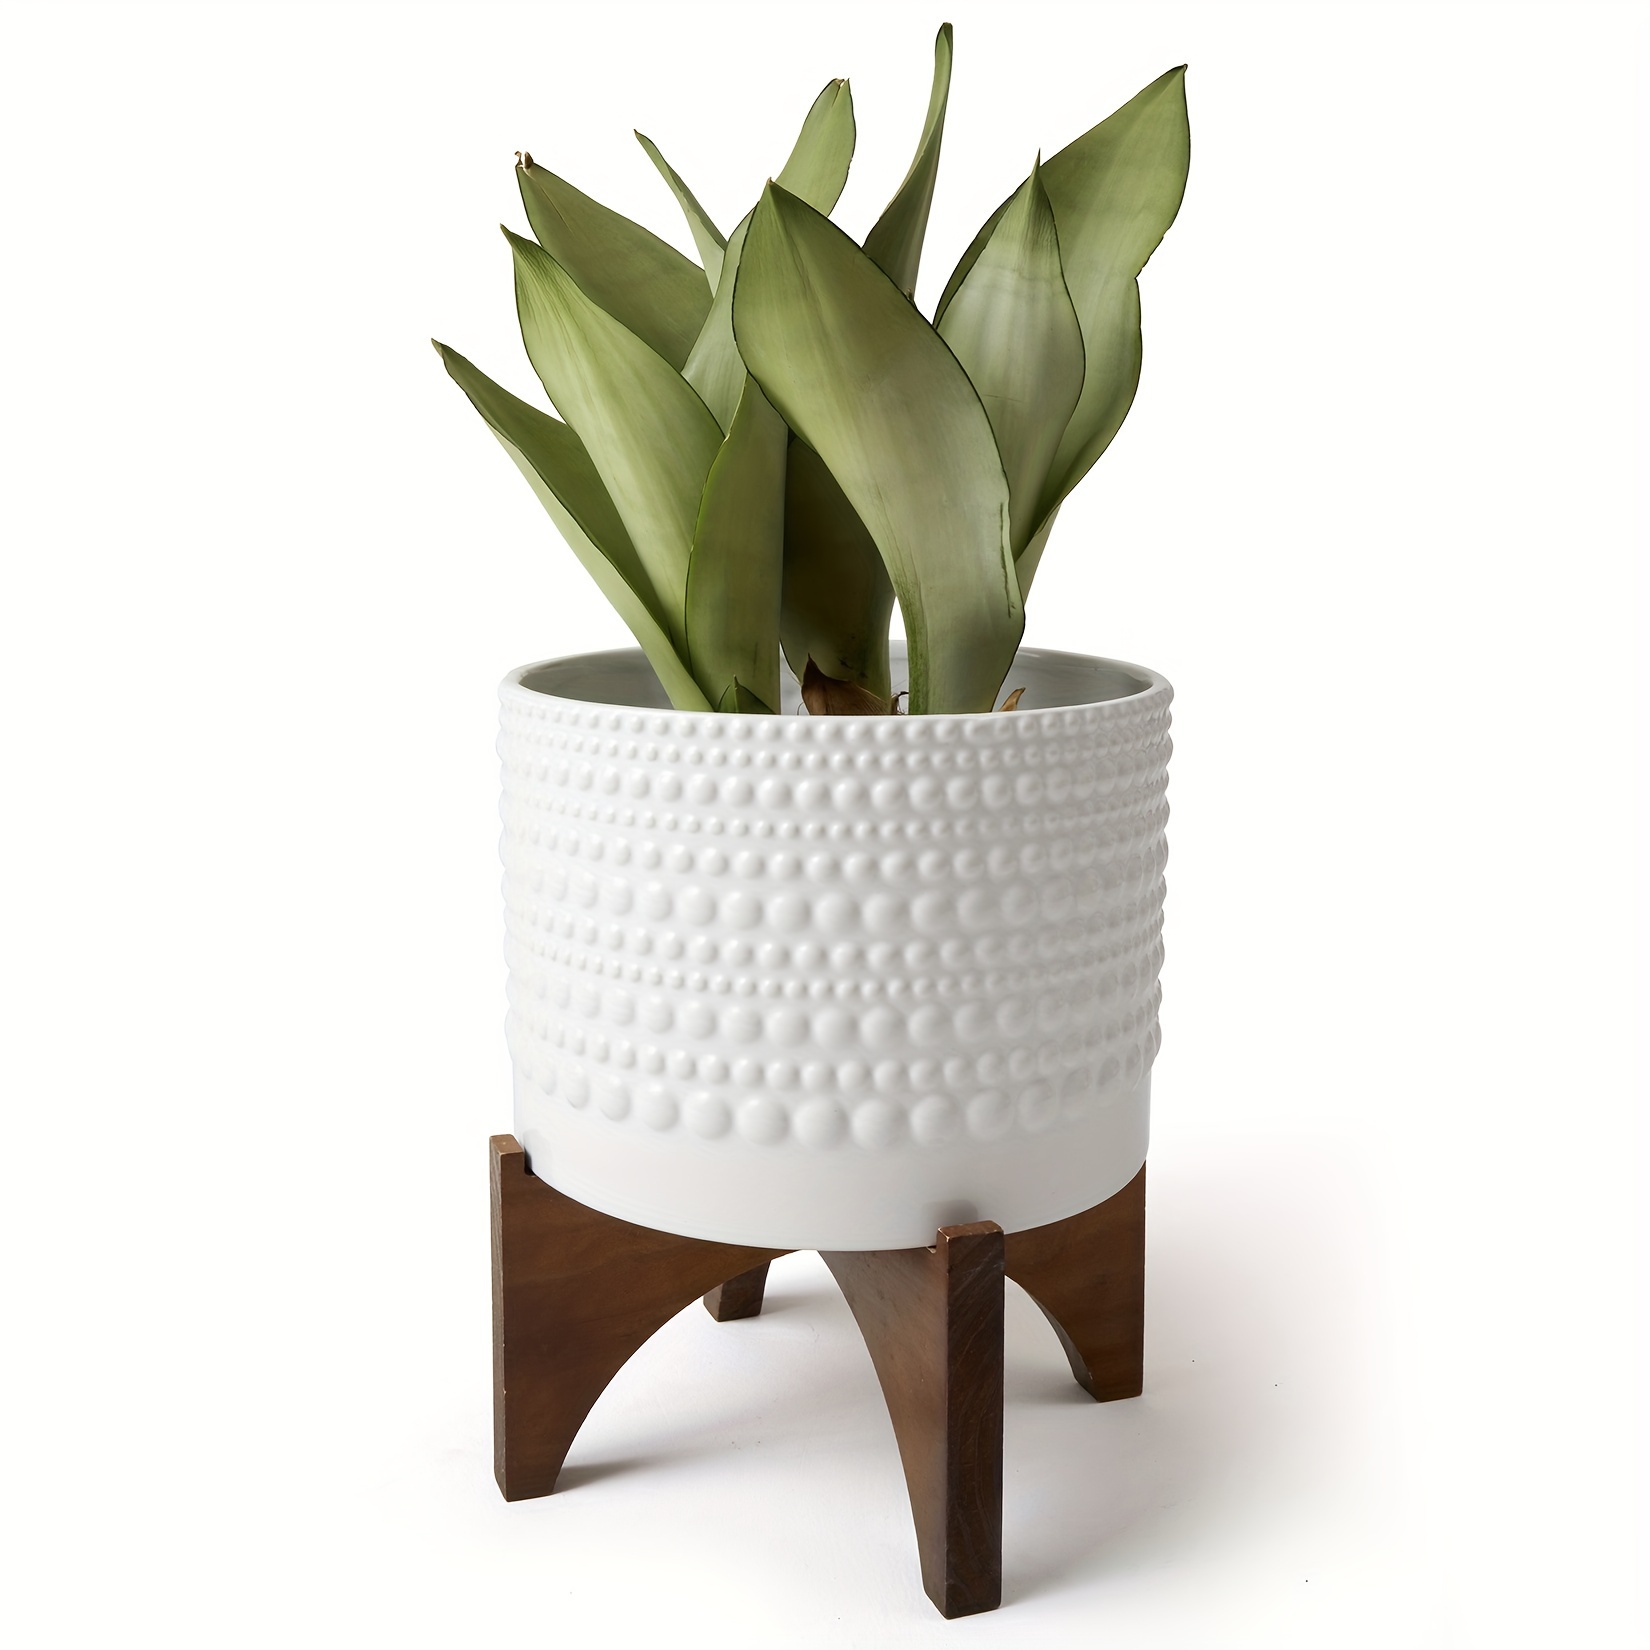 

Vintage Style 9.8 Inch Ceramic Planter With Wood Stand - Embossed Hobnail Patterned Cylinder Flower Pot With Drain Hole For Indoor Plants